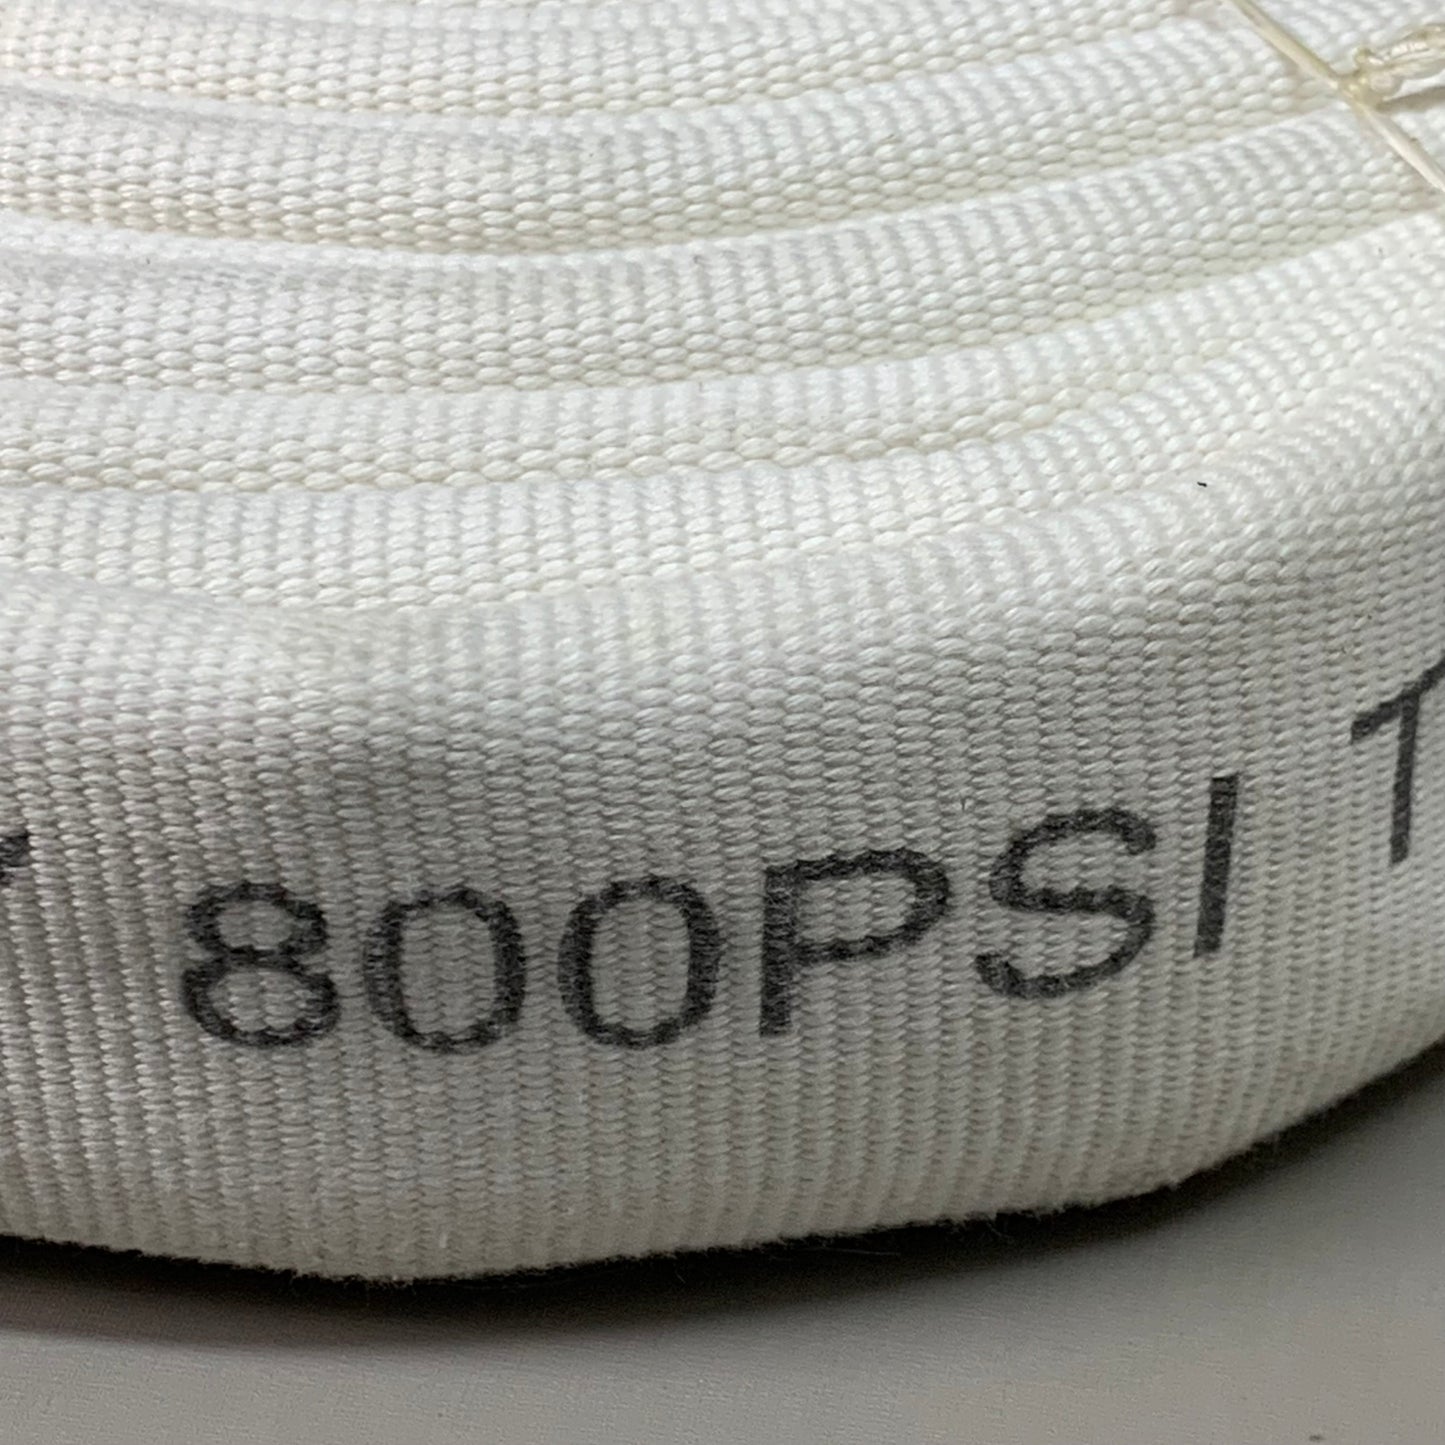 AHERN Double Jacket Industrial Polyester Hose 1.5" x 50' White 800PSI 205234 (New)